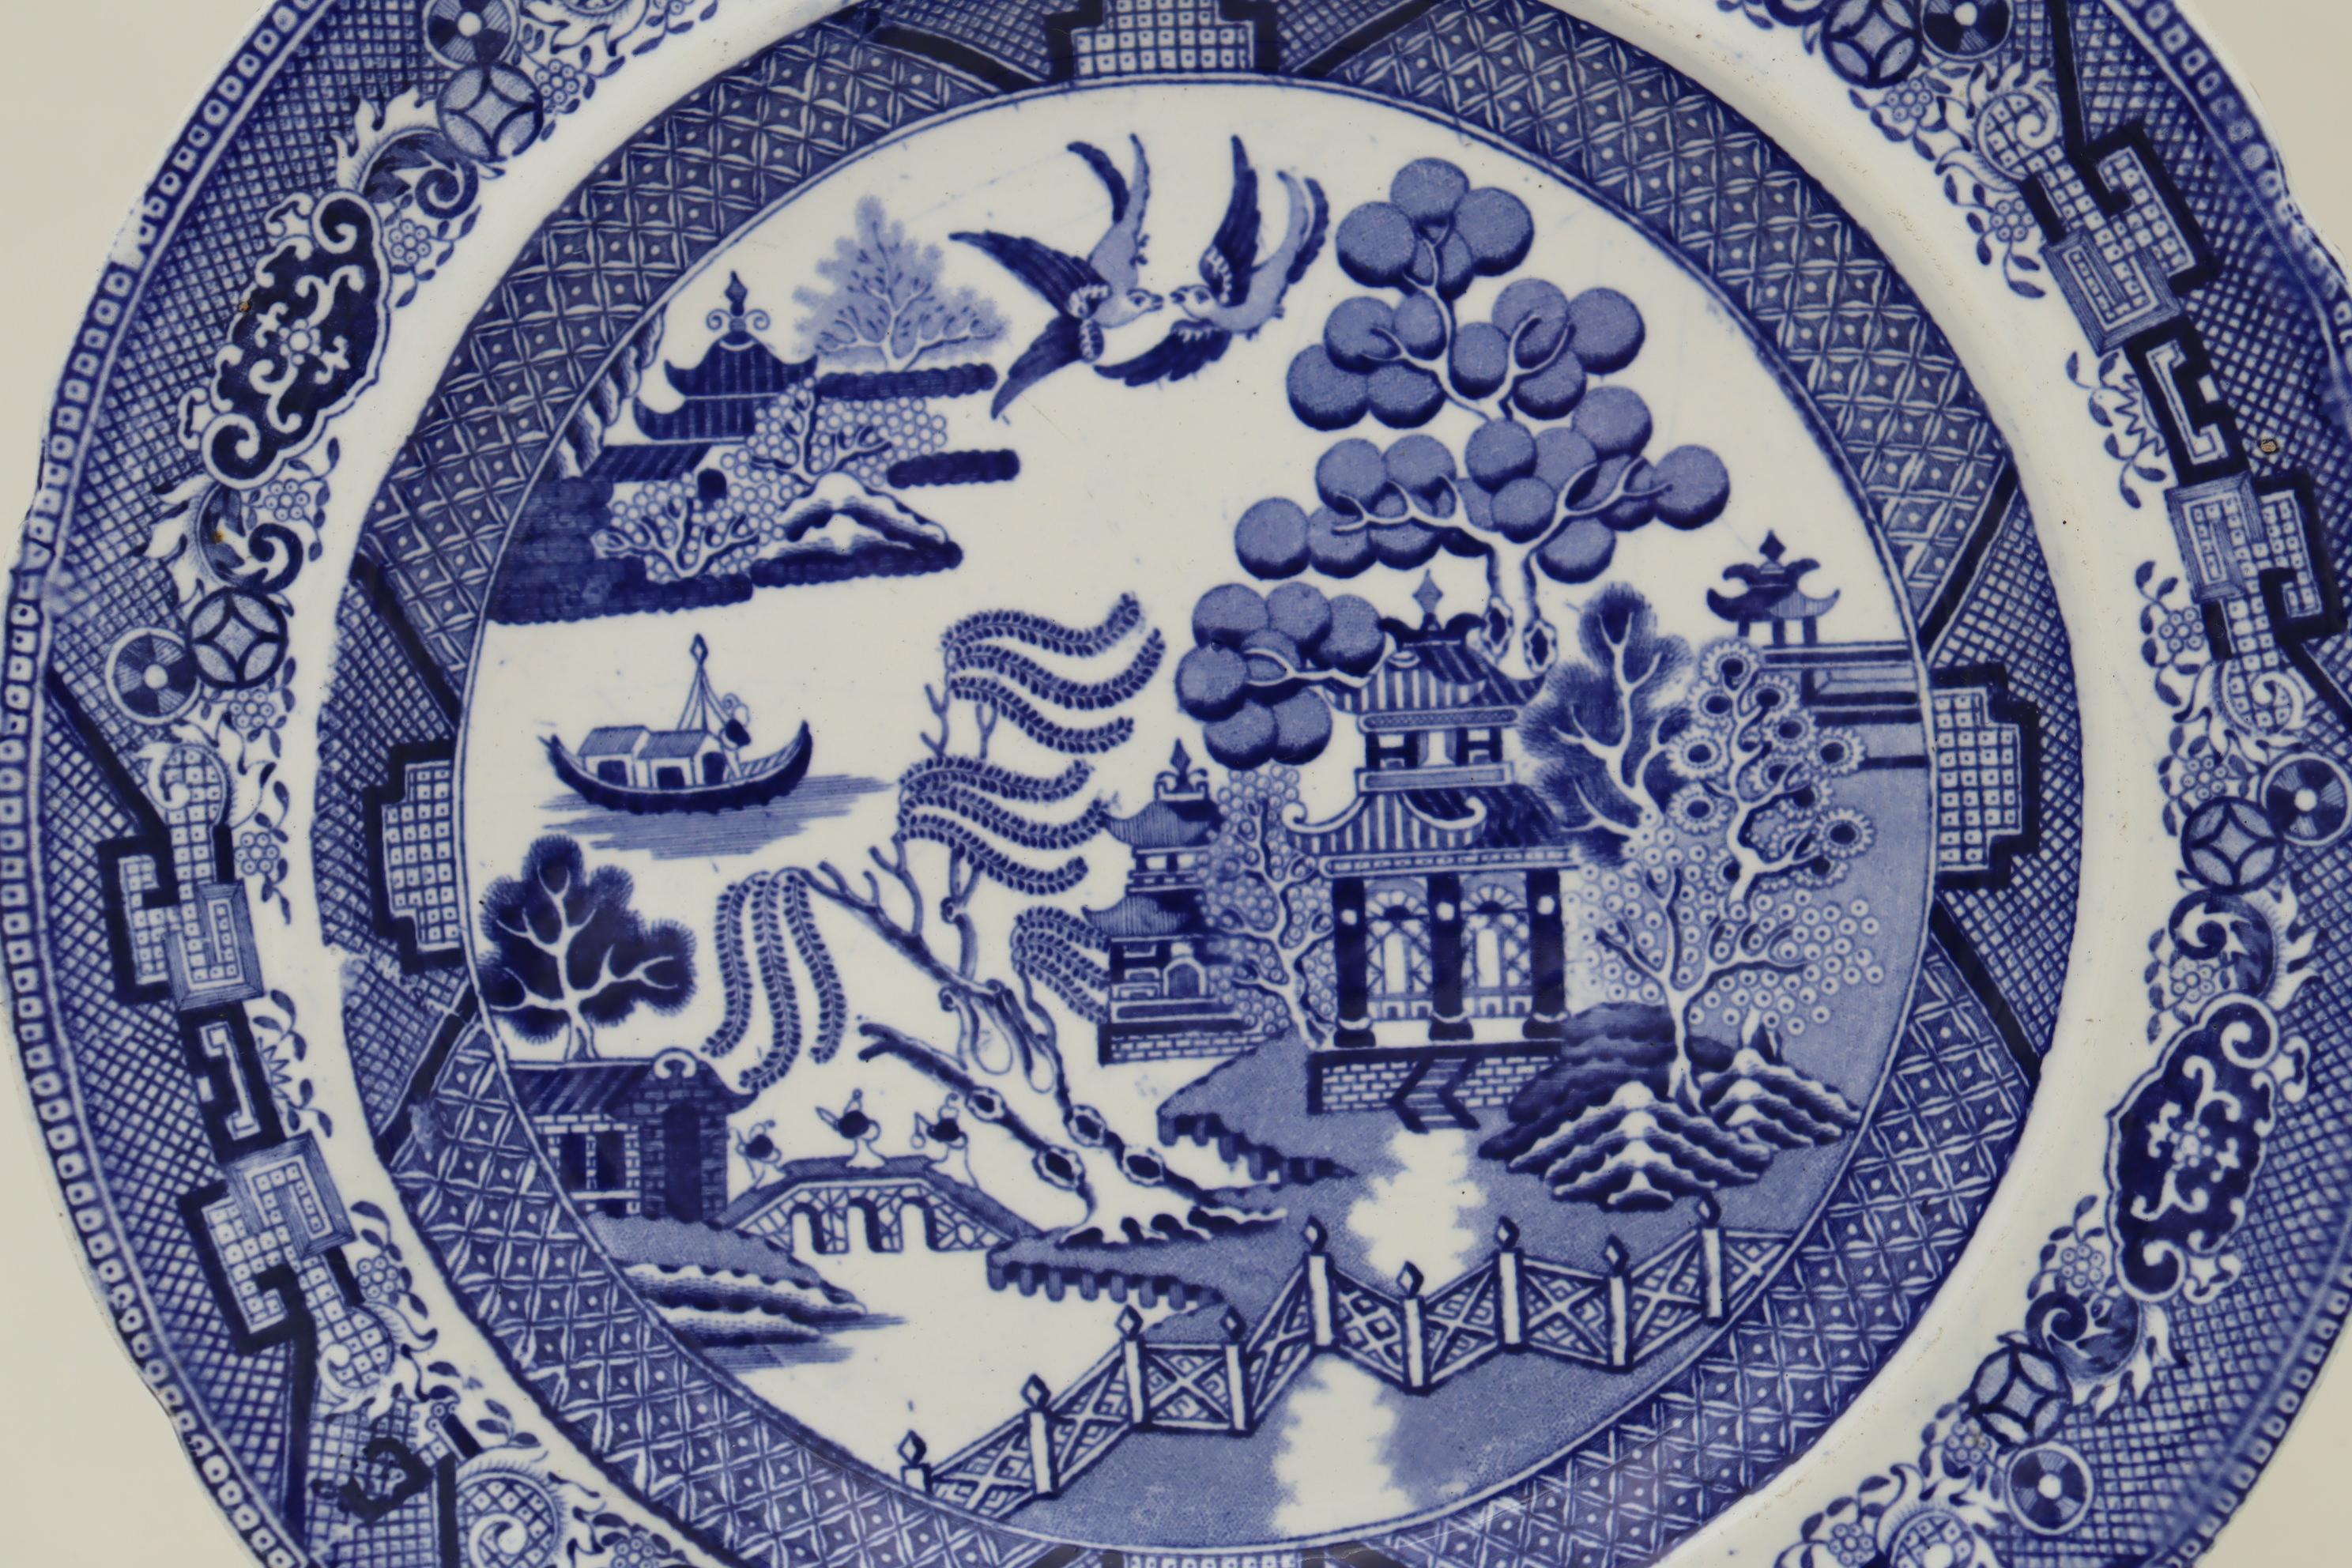 This blue and white Swansea earthenware plate is decorated with their transfer printed standard Willow pattern. It is in very good condition, but does have some smudging of the pattern in spots, mainly to the border. It measures 262 mm (10.25